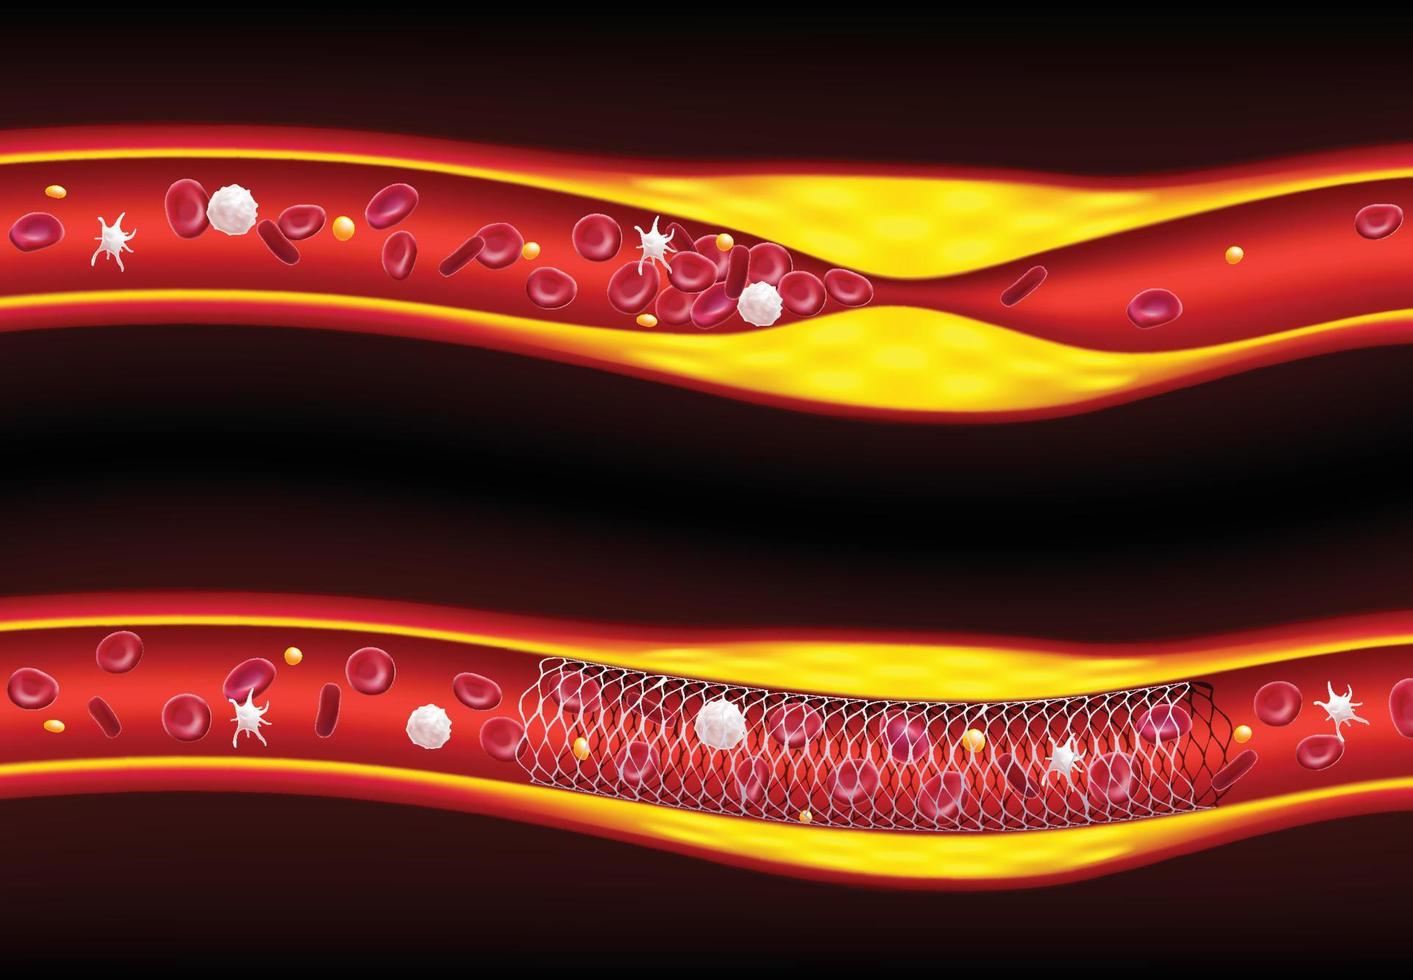 3D illustrations before and after stenting improve blood flow, atherosclerosis. vector